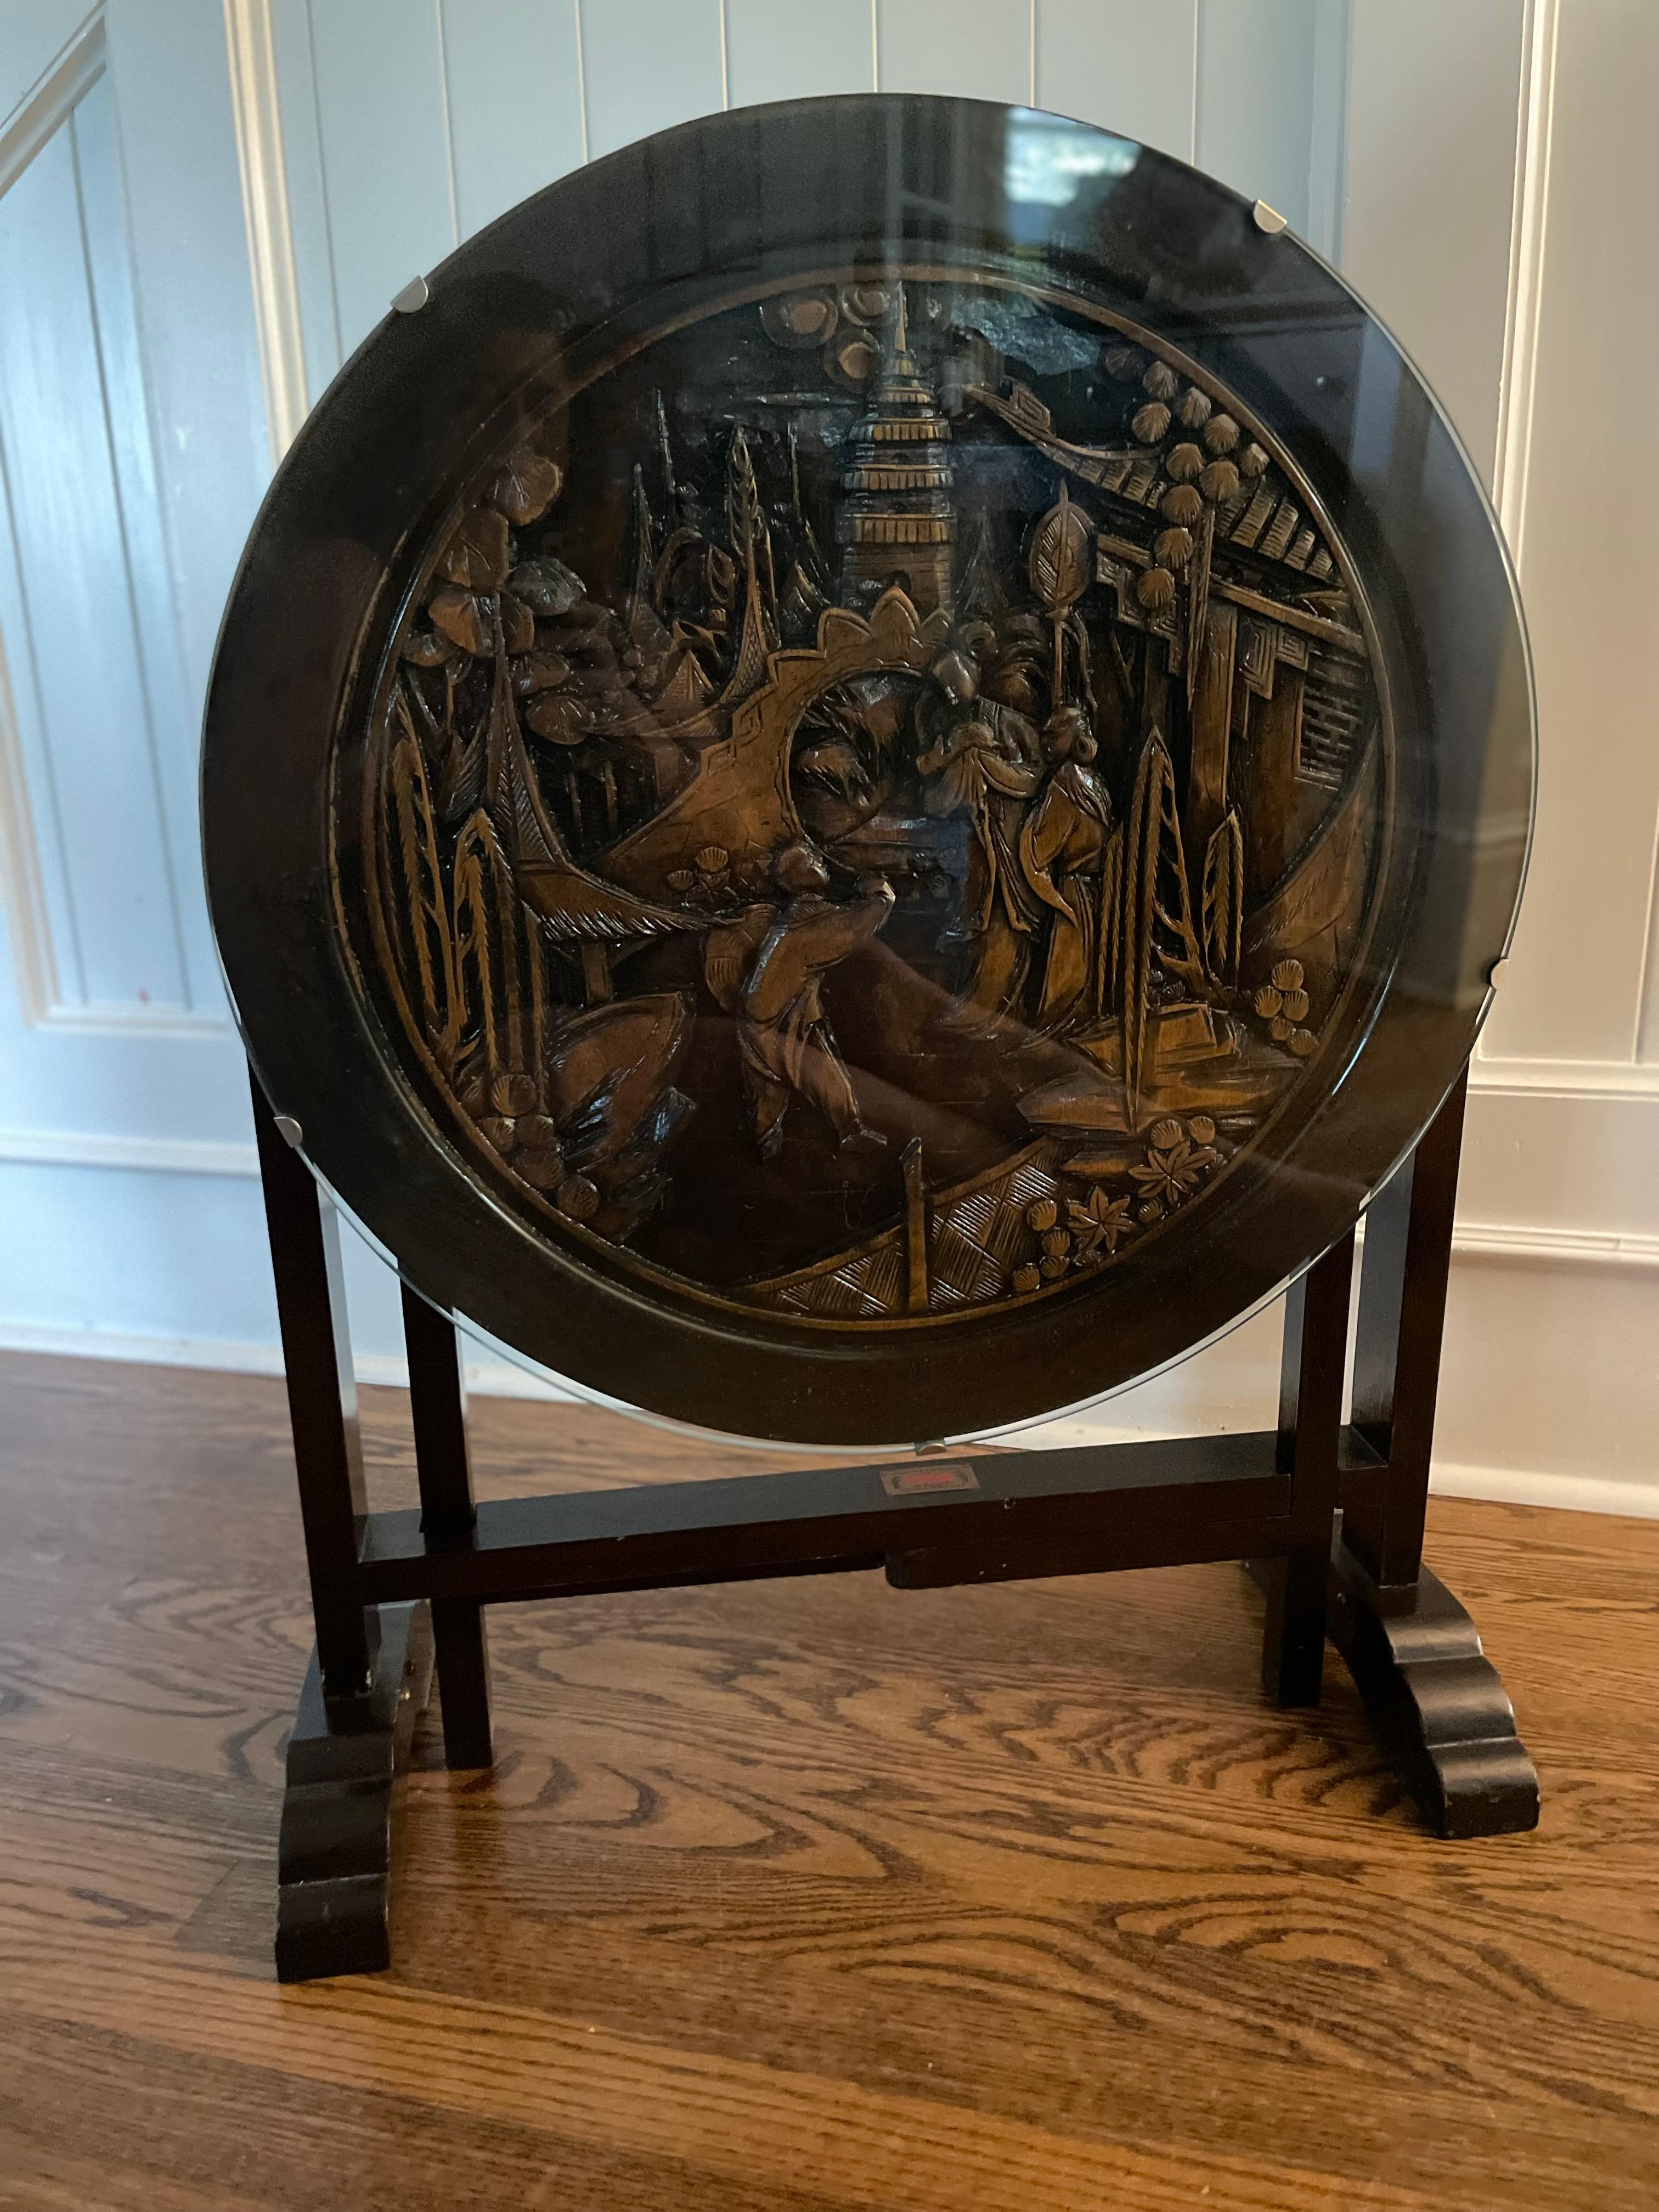 Exquisitely hand-carved hardwood accent side tea table, early to mid 20th century. The circular tilt-top presents an exquisite, detailed relief sculpture with a Chinoiserie motif. Its graceful lines are raised on a trestle-style base and four gate